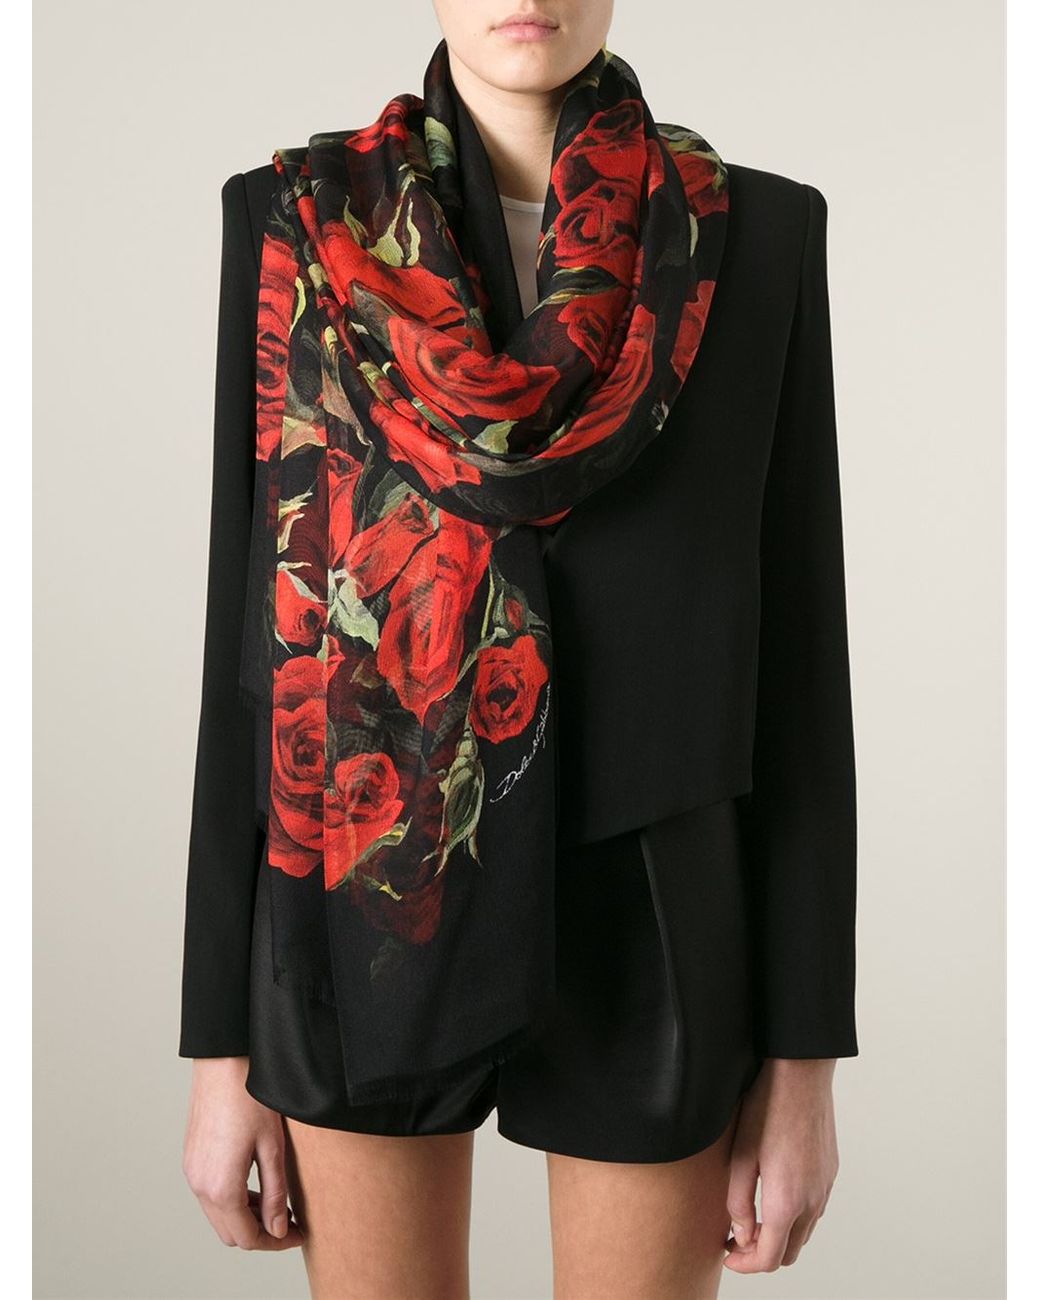 Dolce & Gabbana Roses Print Scarf in Red